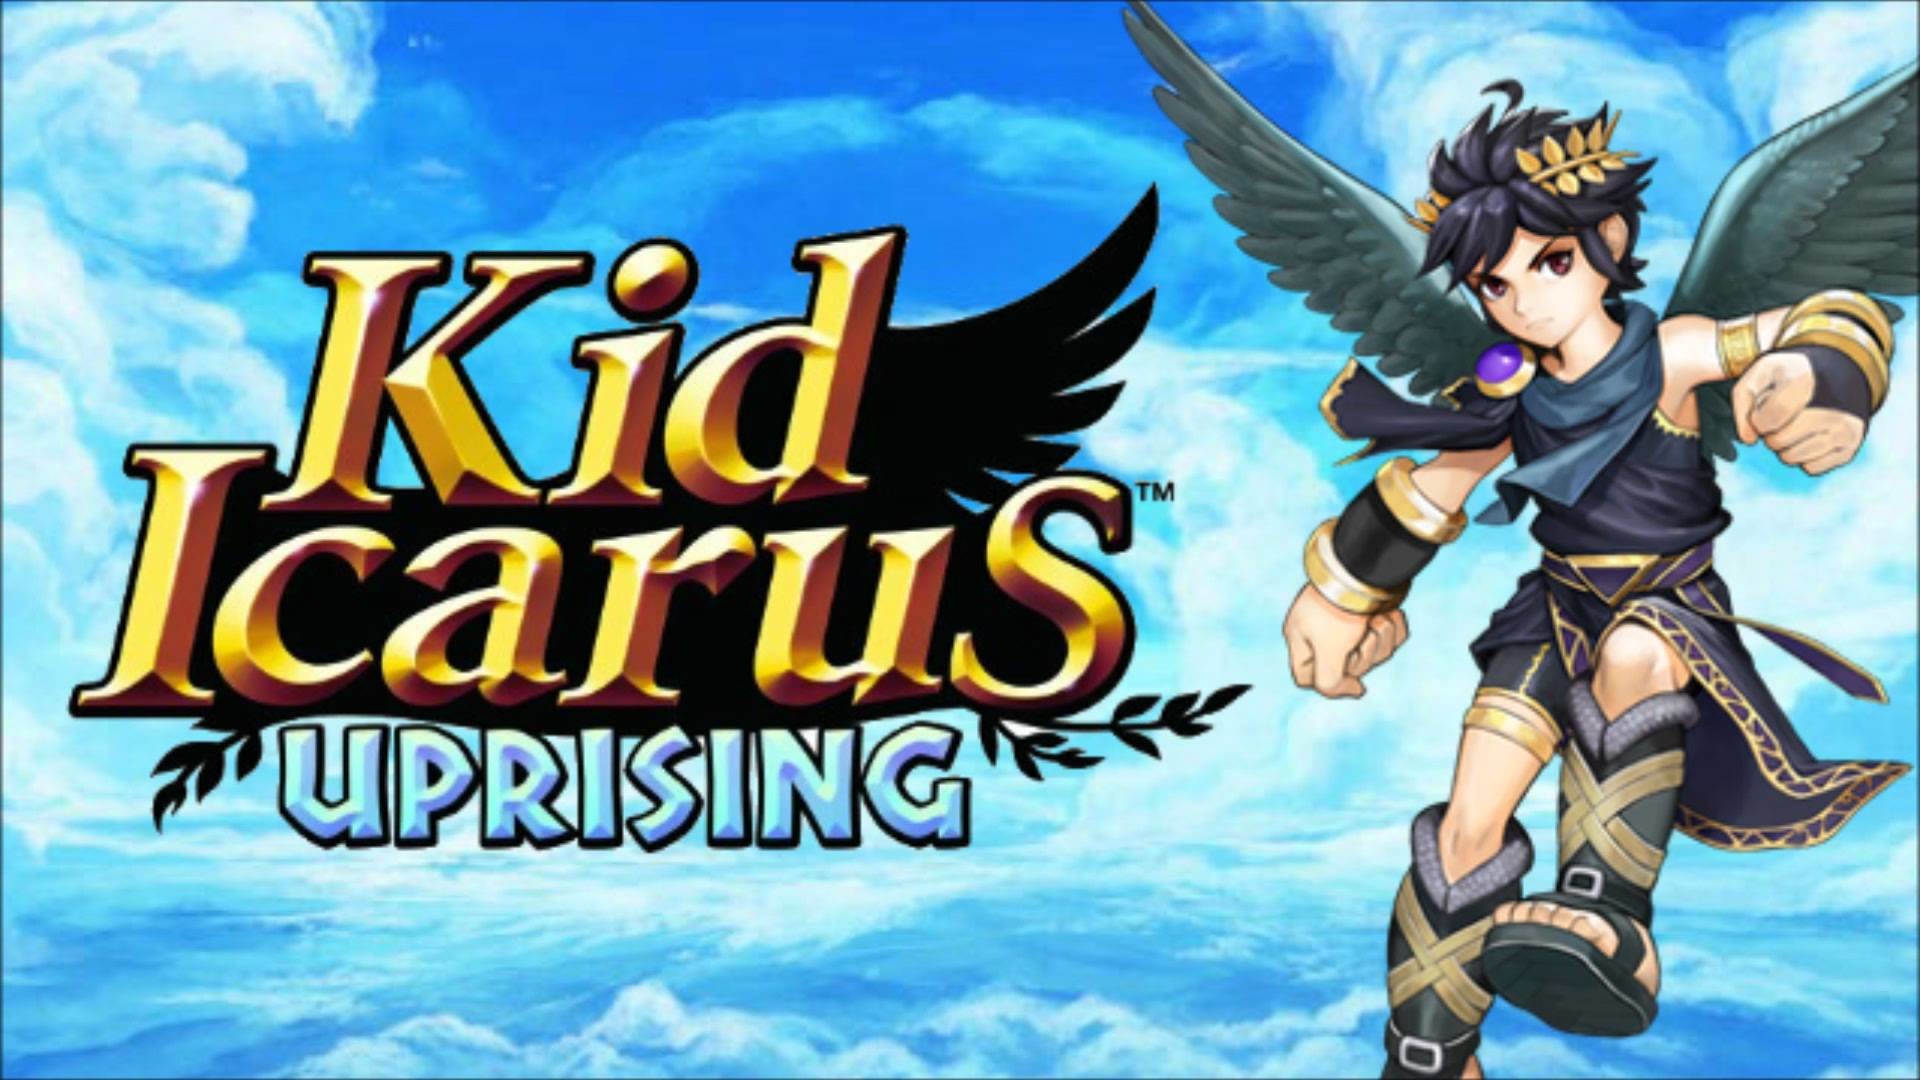 1920x1080 Kid Icarus Uprising Nintendo 3DS wallpapers (47 Wallpapers) – HD Wallpapers